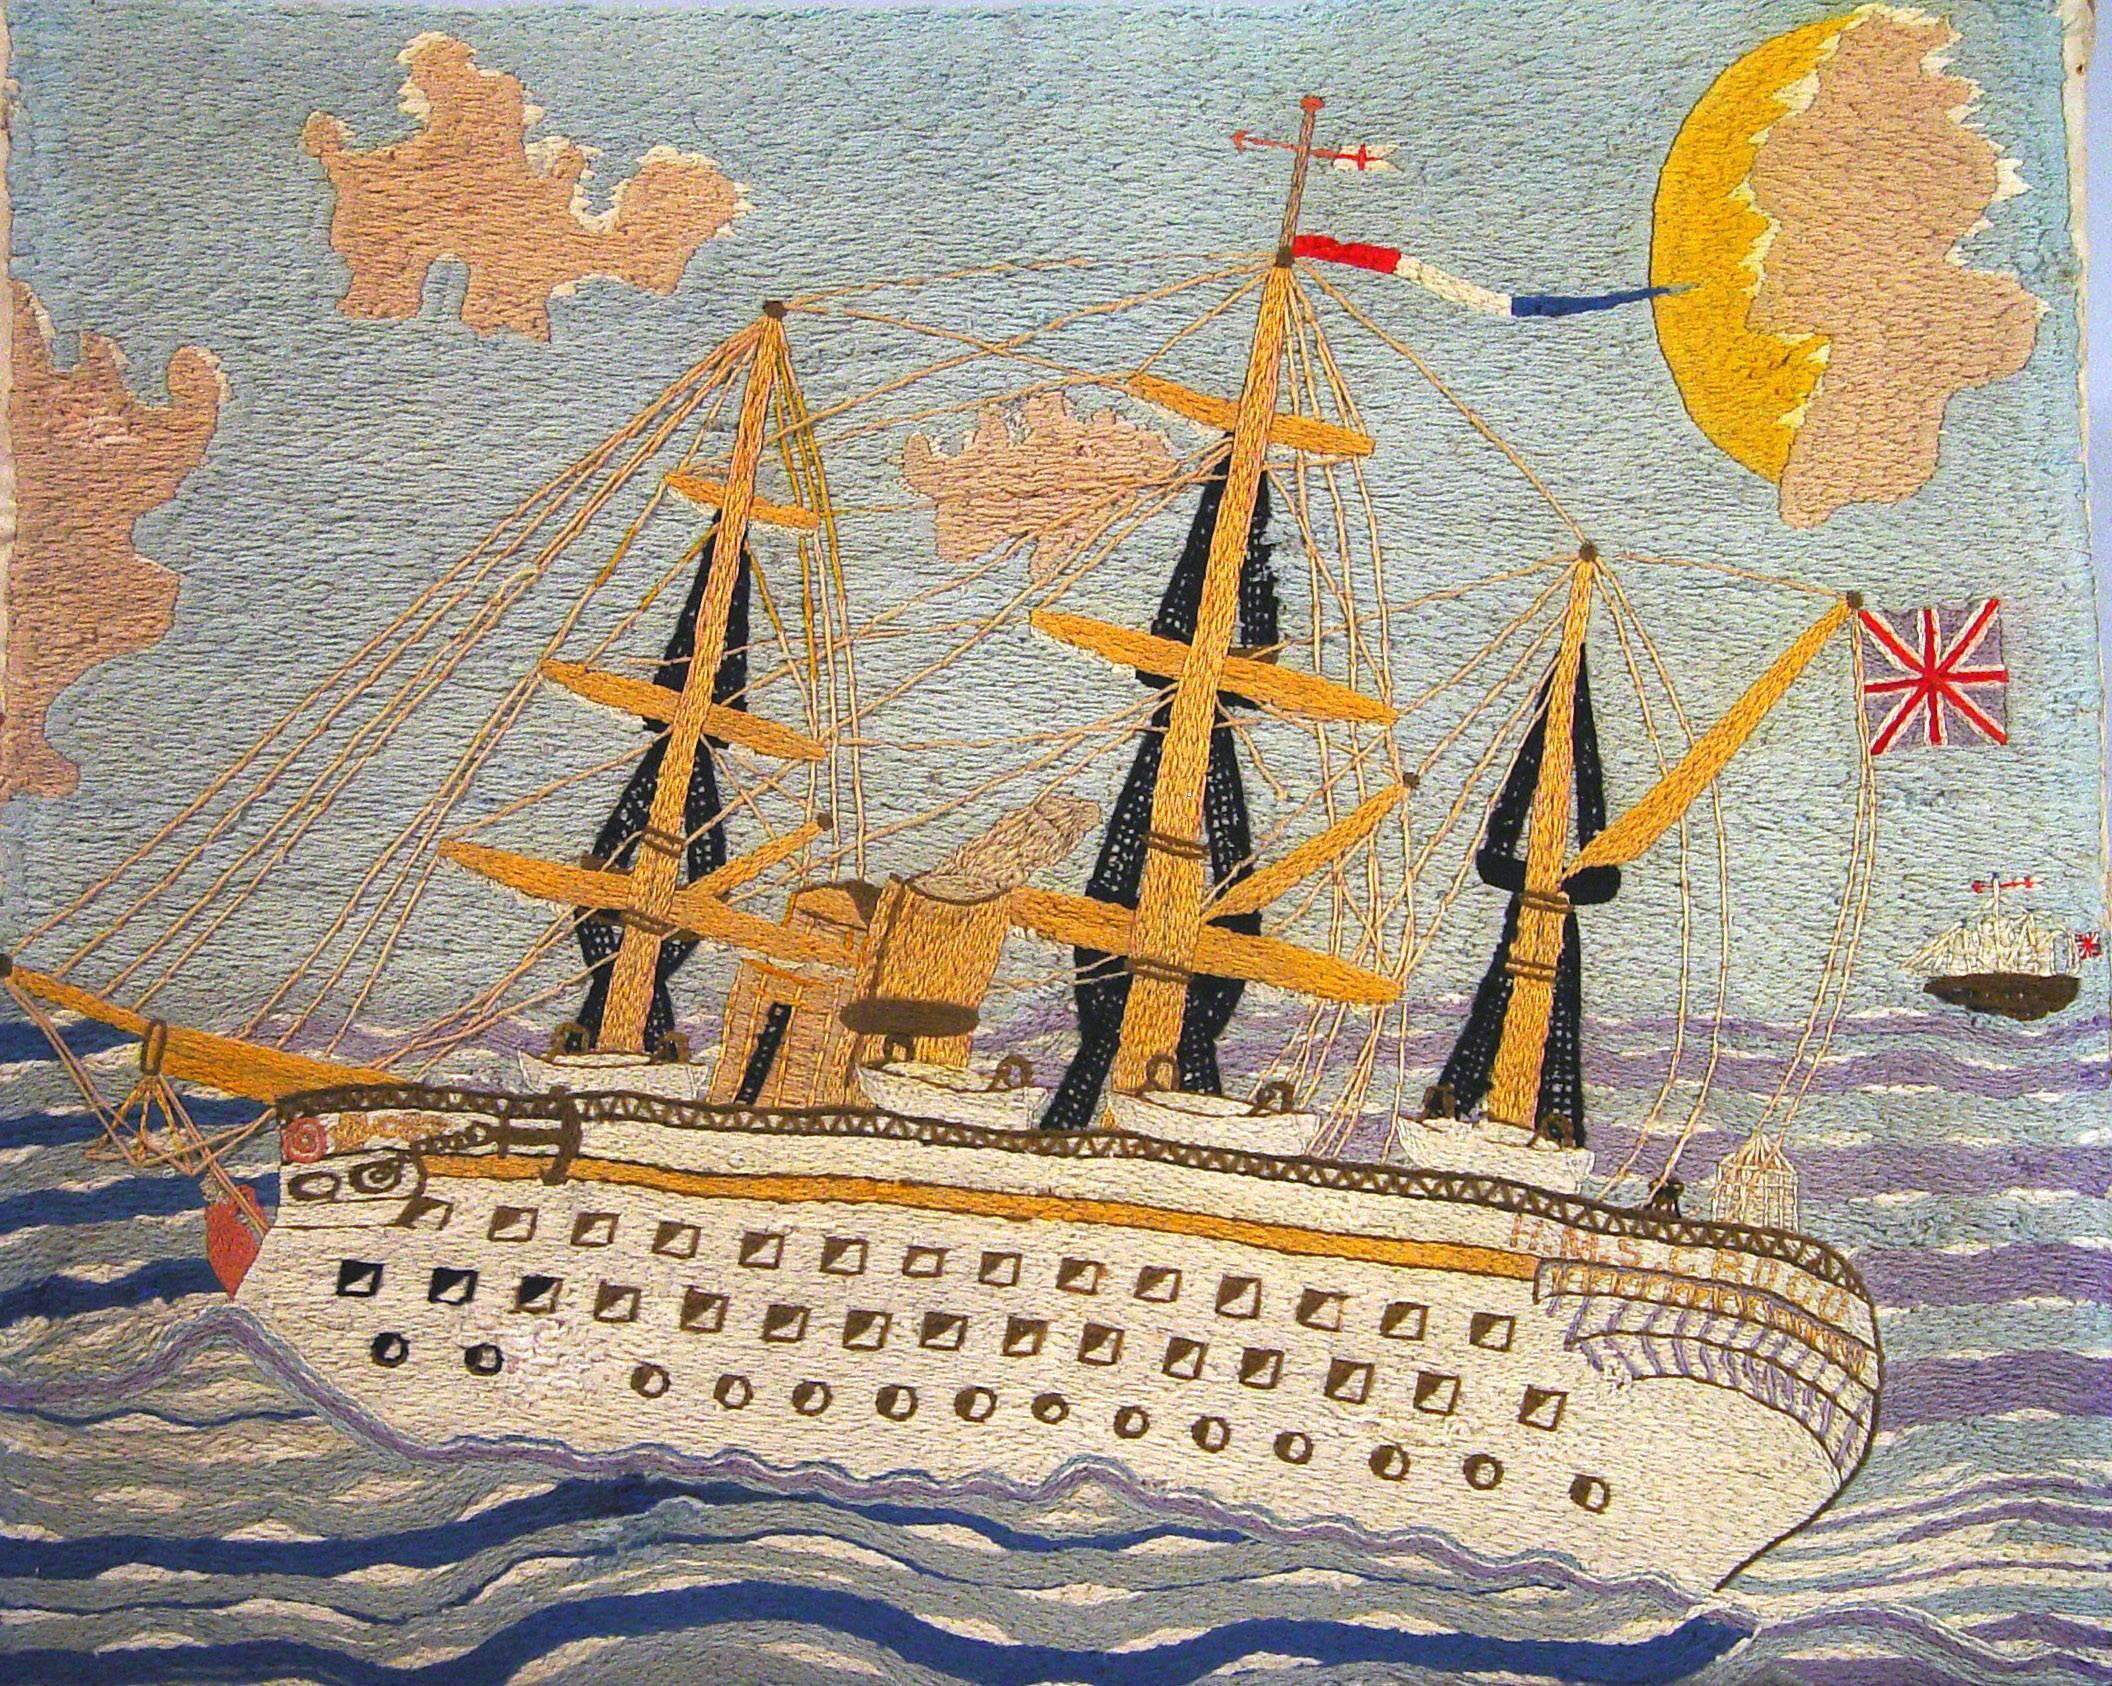 Folk Art Sailor's Large Woolwork Woolie of The Royal Navy Ship H.M.S. Crocodile, 
A Euphrates-class Troopship,
circa 1875-1890.


The large naive woolie depicts H.M.S. Crocodile steaming in rough waters. The ship is a converted sailing ship. A